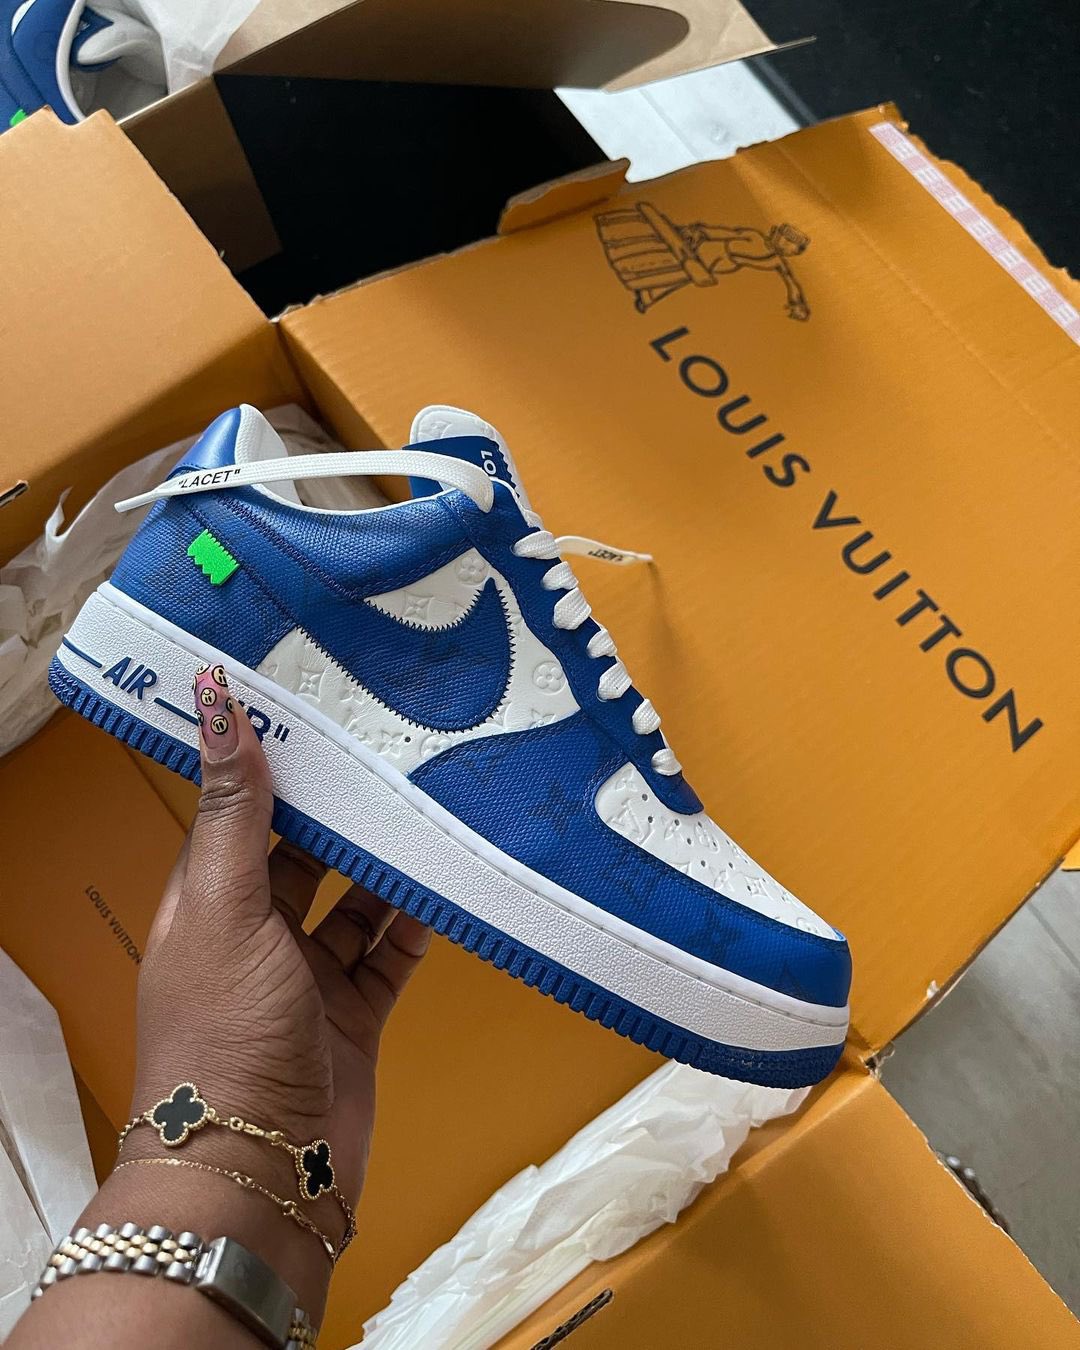 Ovrnundr on X: The release details for the Louis Vuitton x Nike Air Force  1 Low & Mid by Virgil Abloh, releasing exclusively online Tuesday July  19th in 9 colourways, retailing for